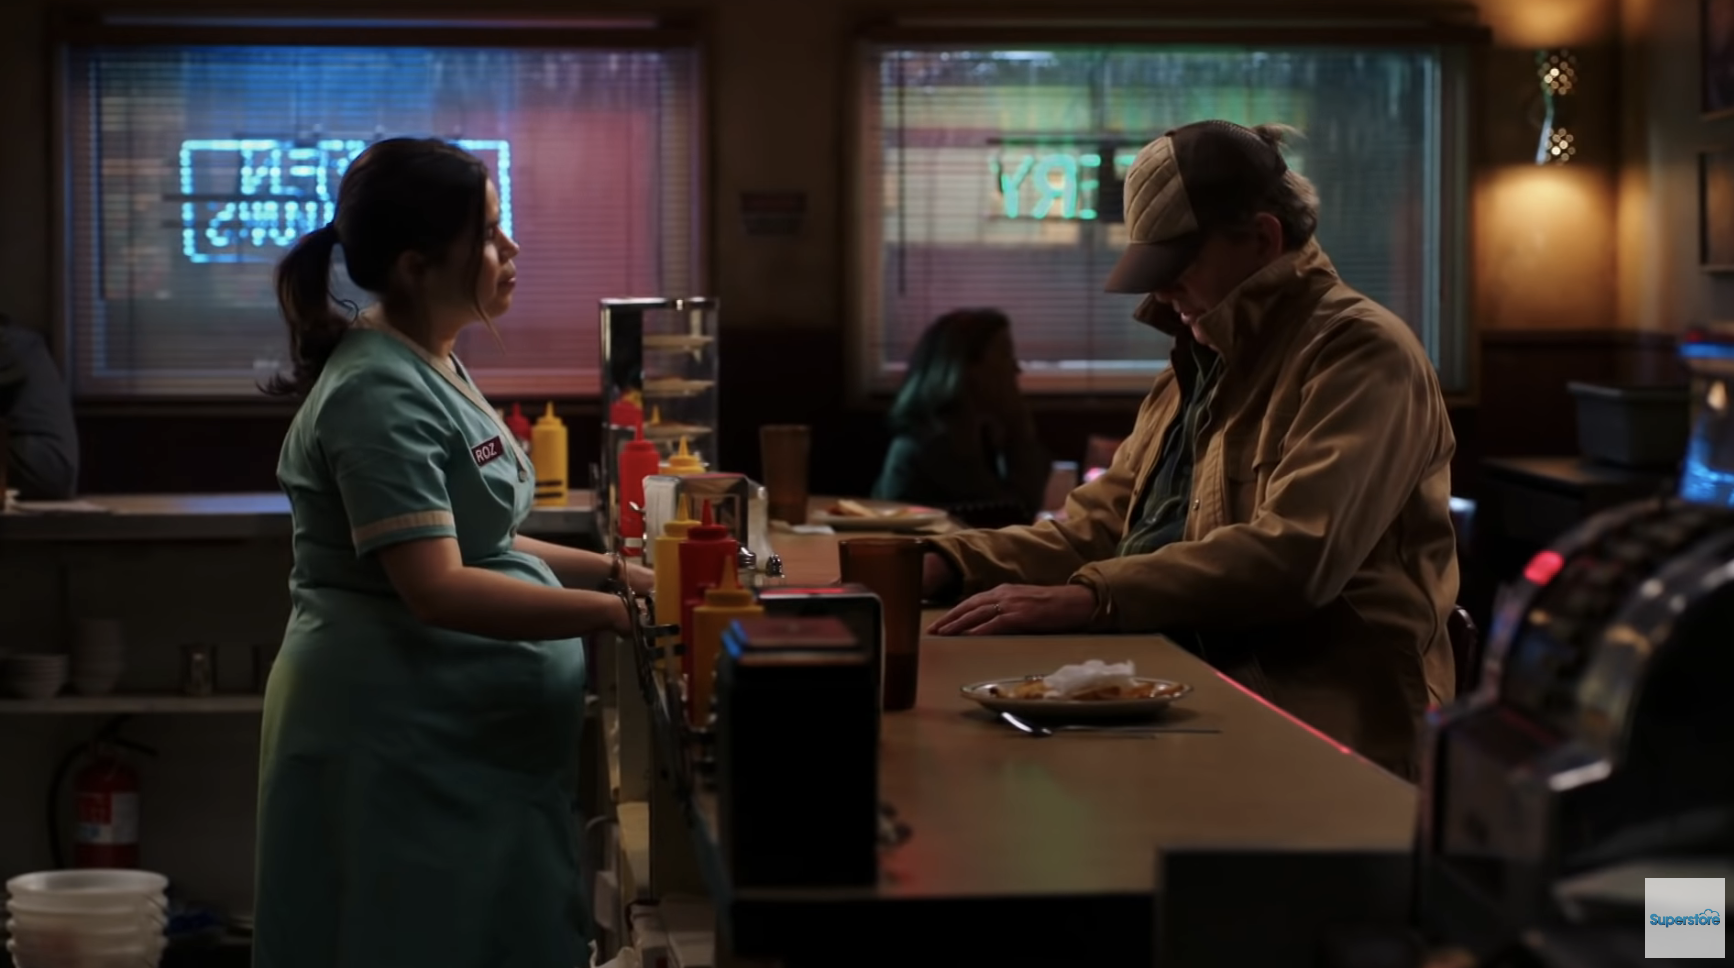 Glenn sits at a diner counter while Amy serves him